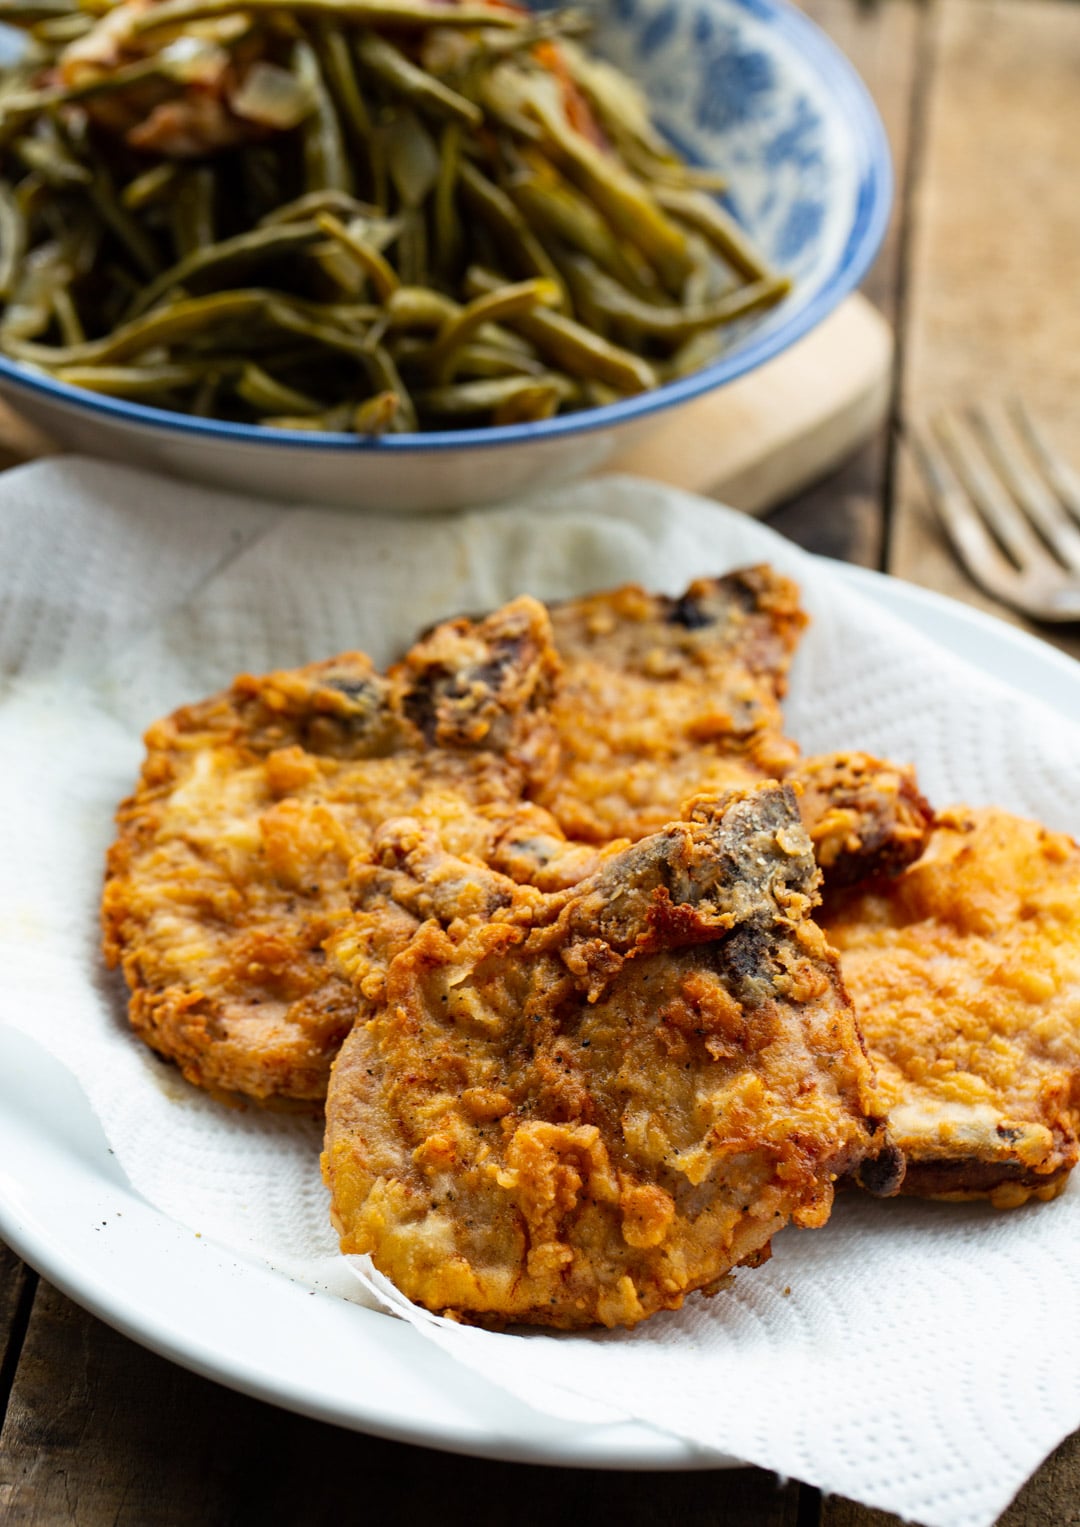 Fried pork chops on a plate and bowl of green beans.